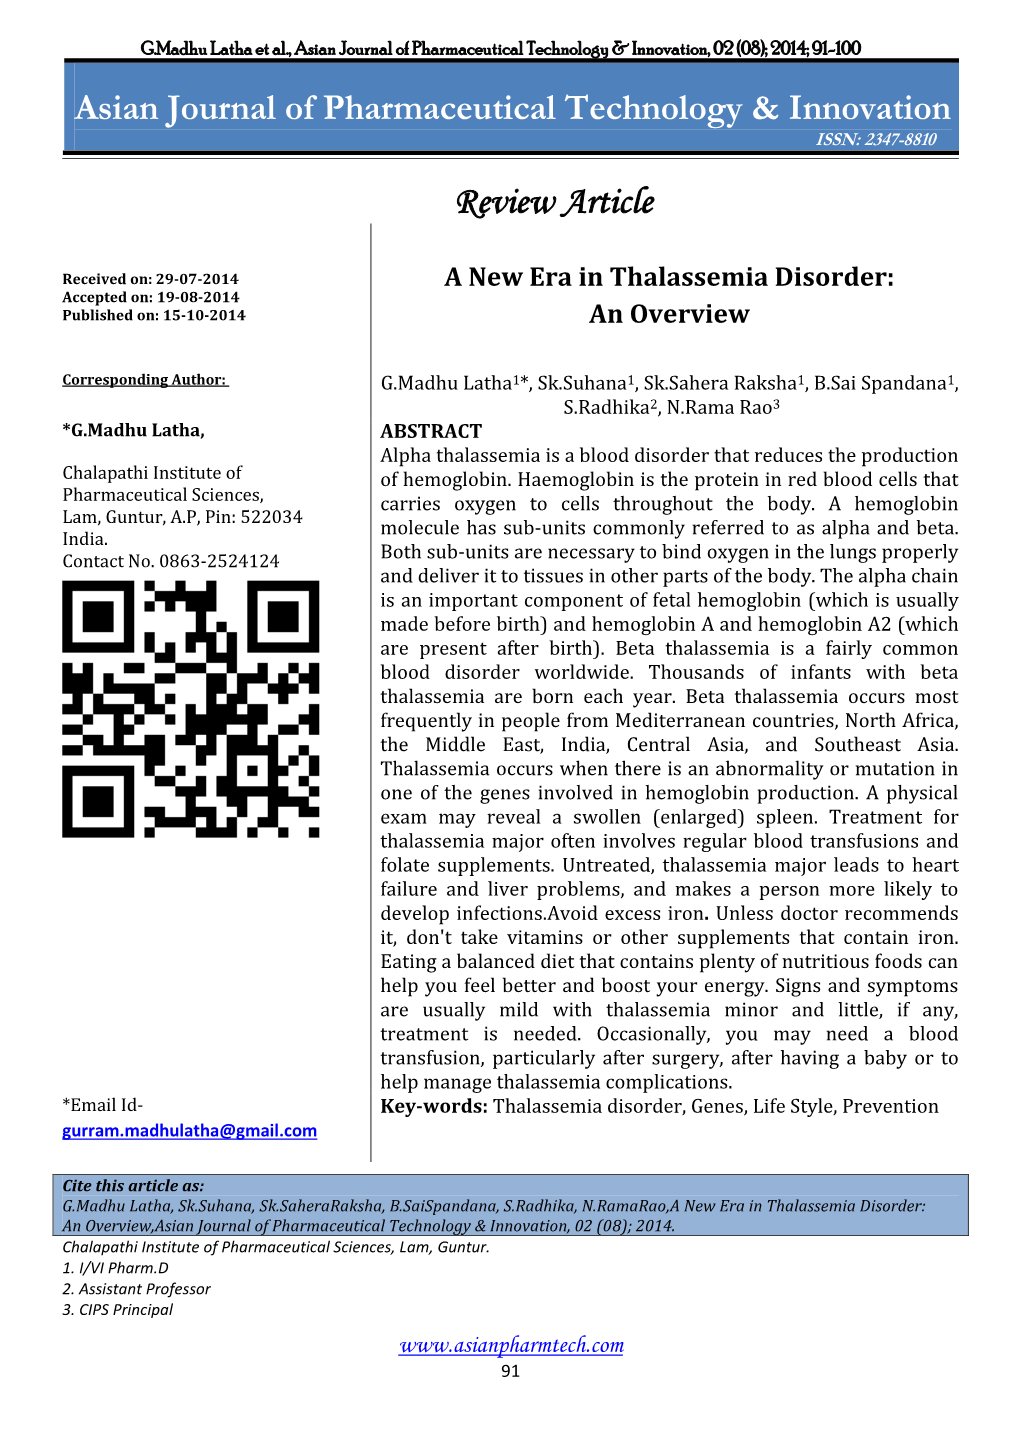 A New Era in Thalassemia Disorder: an Overview,Asian Journal of Pharmaceutical Technology & Innovation, 02 (08); 2014